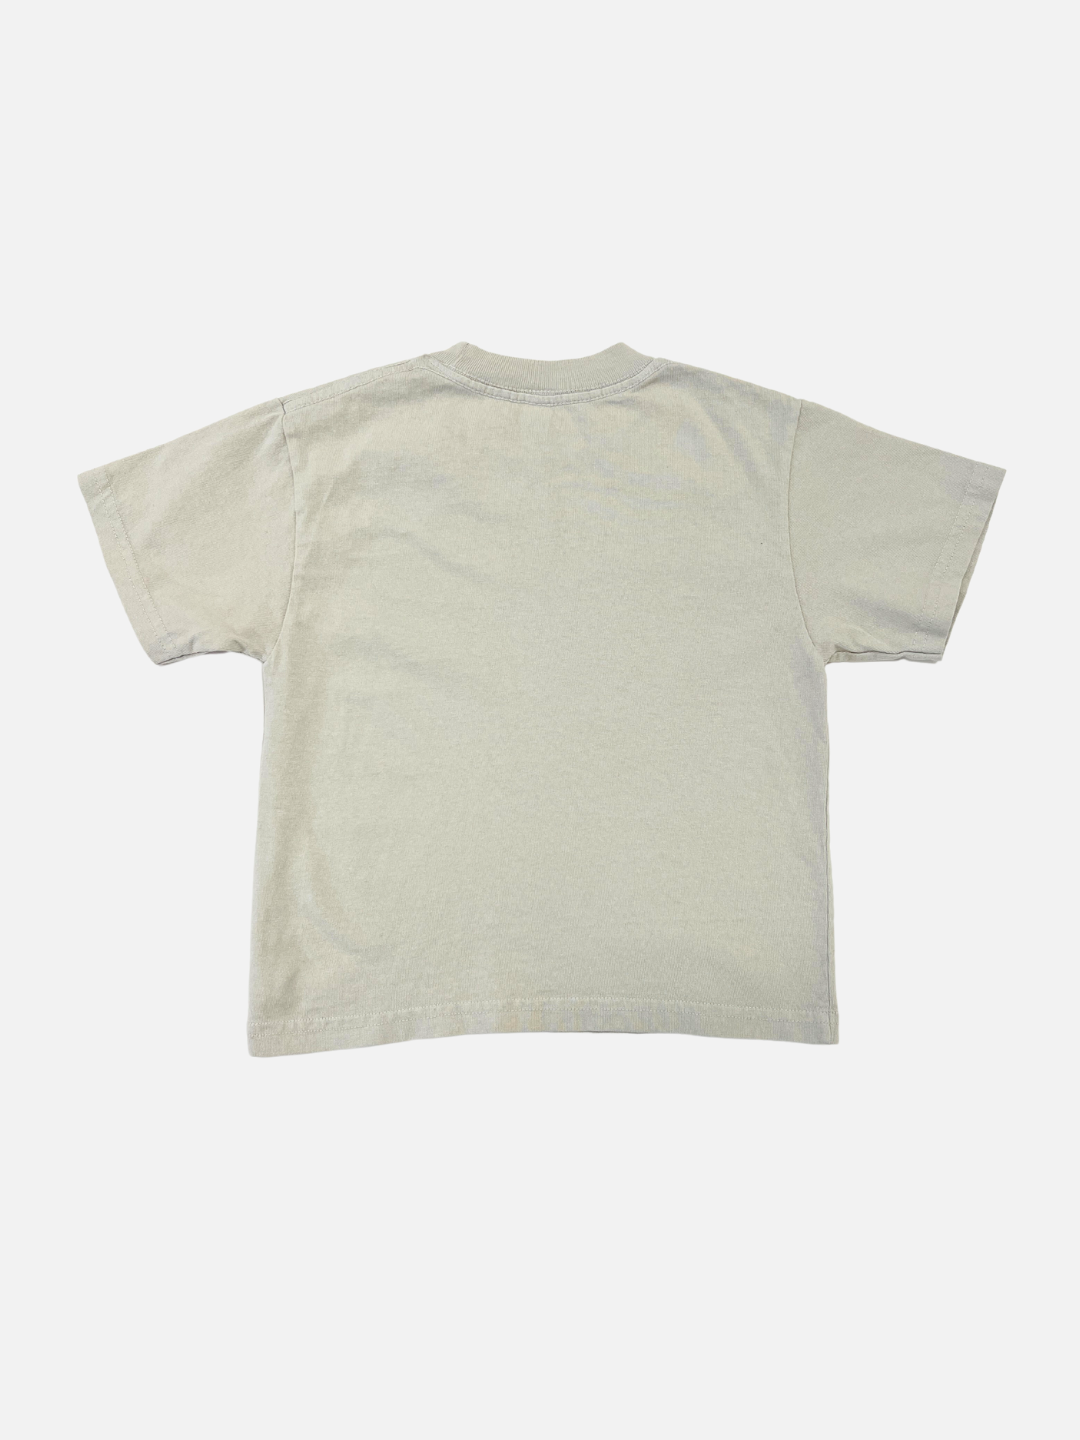 Back view of a kids cement grey t-shirt with short sleeves.